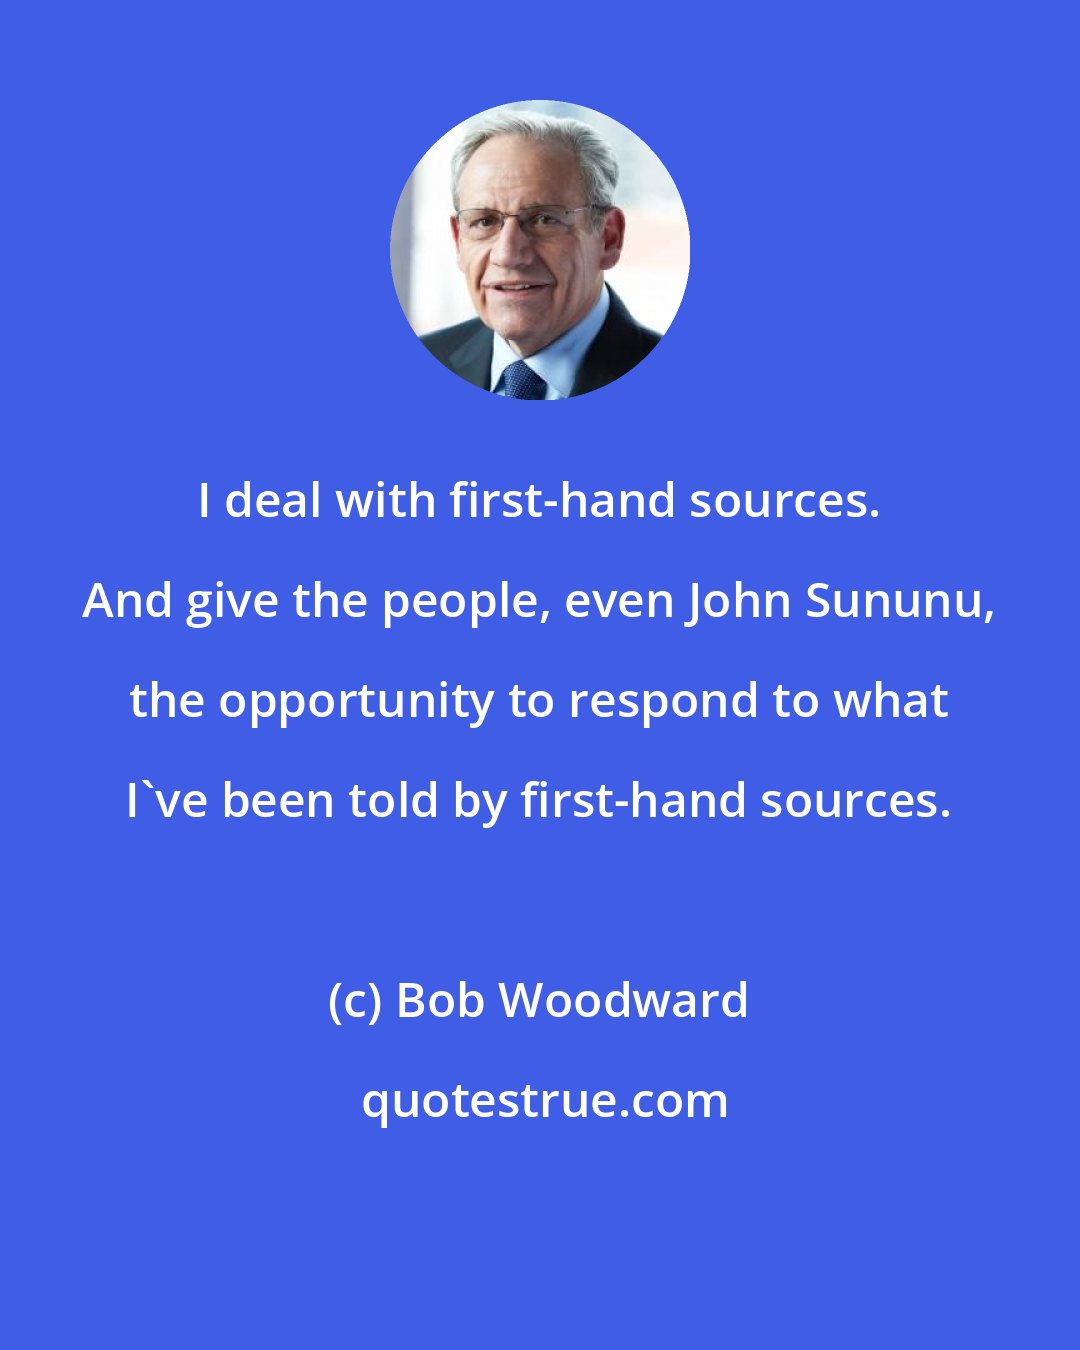 Bob Woodward: I deal with first-hand sources. And give the people, even John Sununu, the opportunity to respond to what I've been told by first-hand sources.